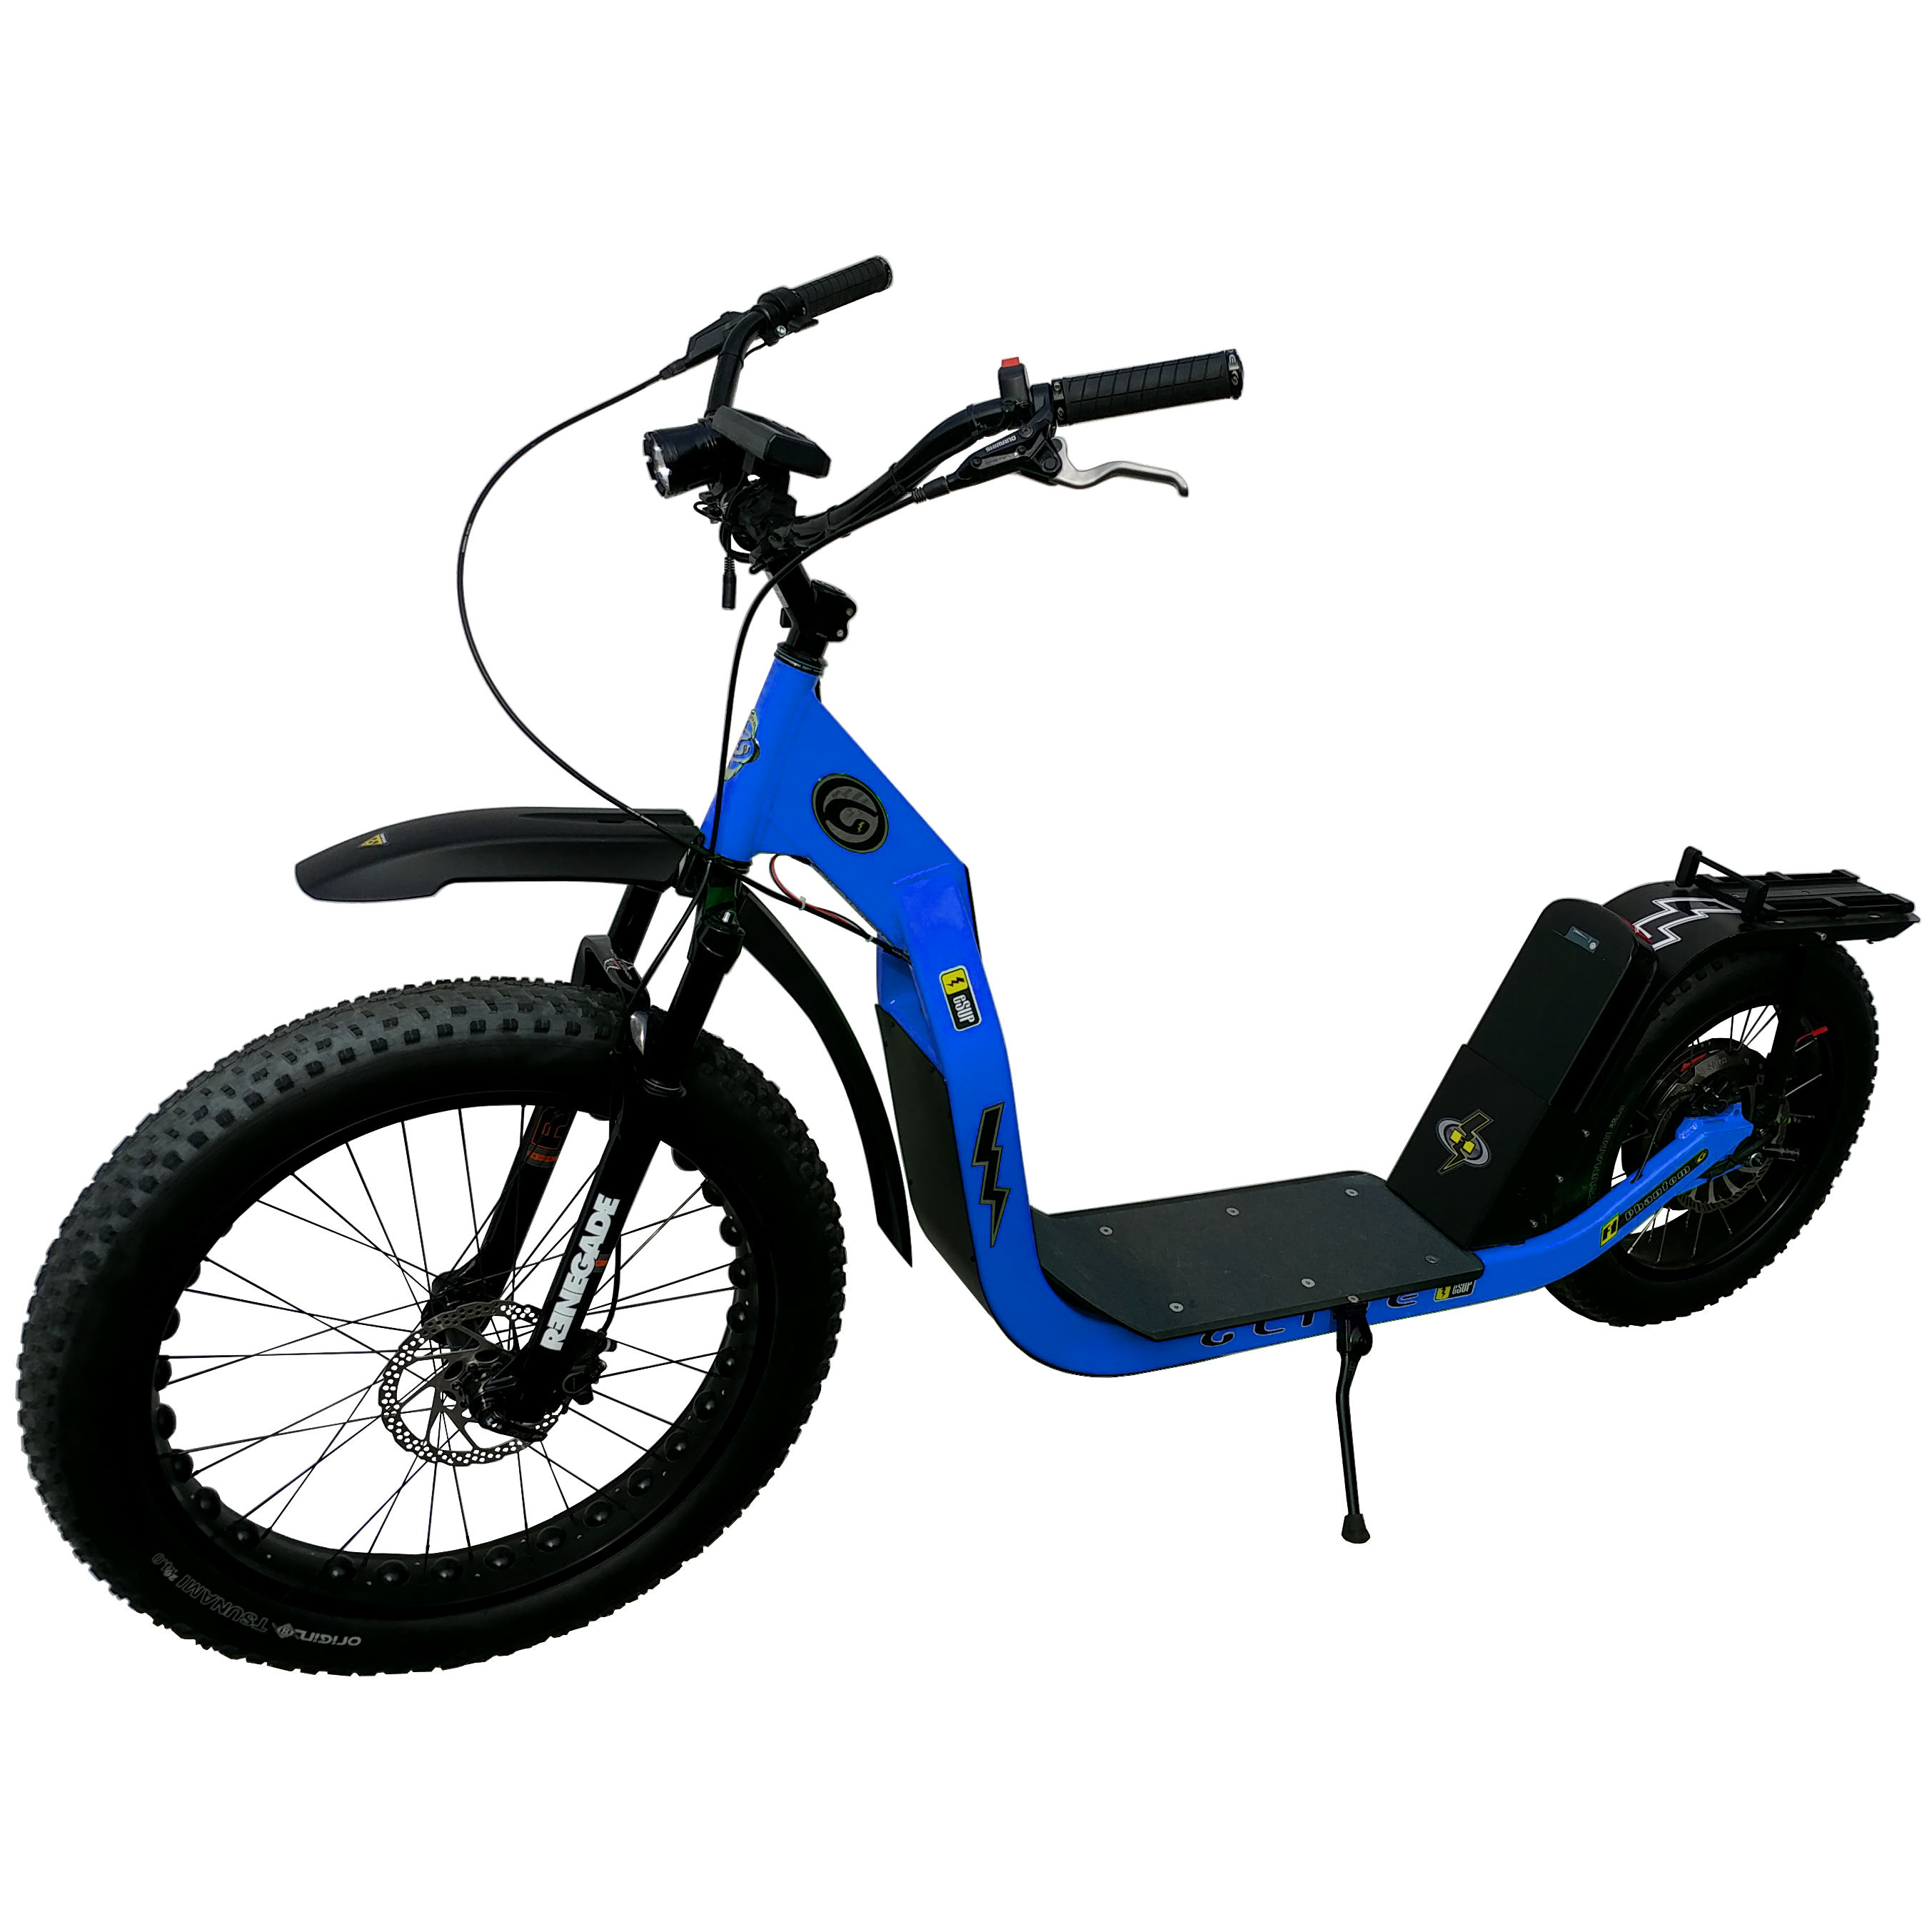 Glide Cruisers Sabre 48V/18Ah 2000W Fat Tire Electric Scooter F4